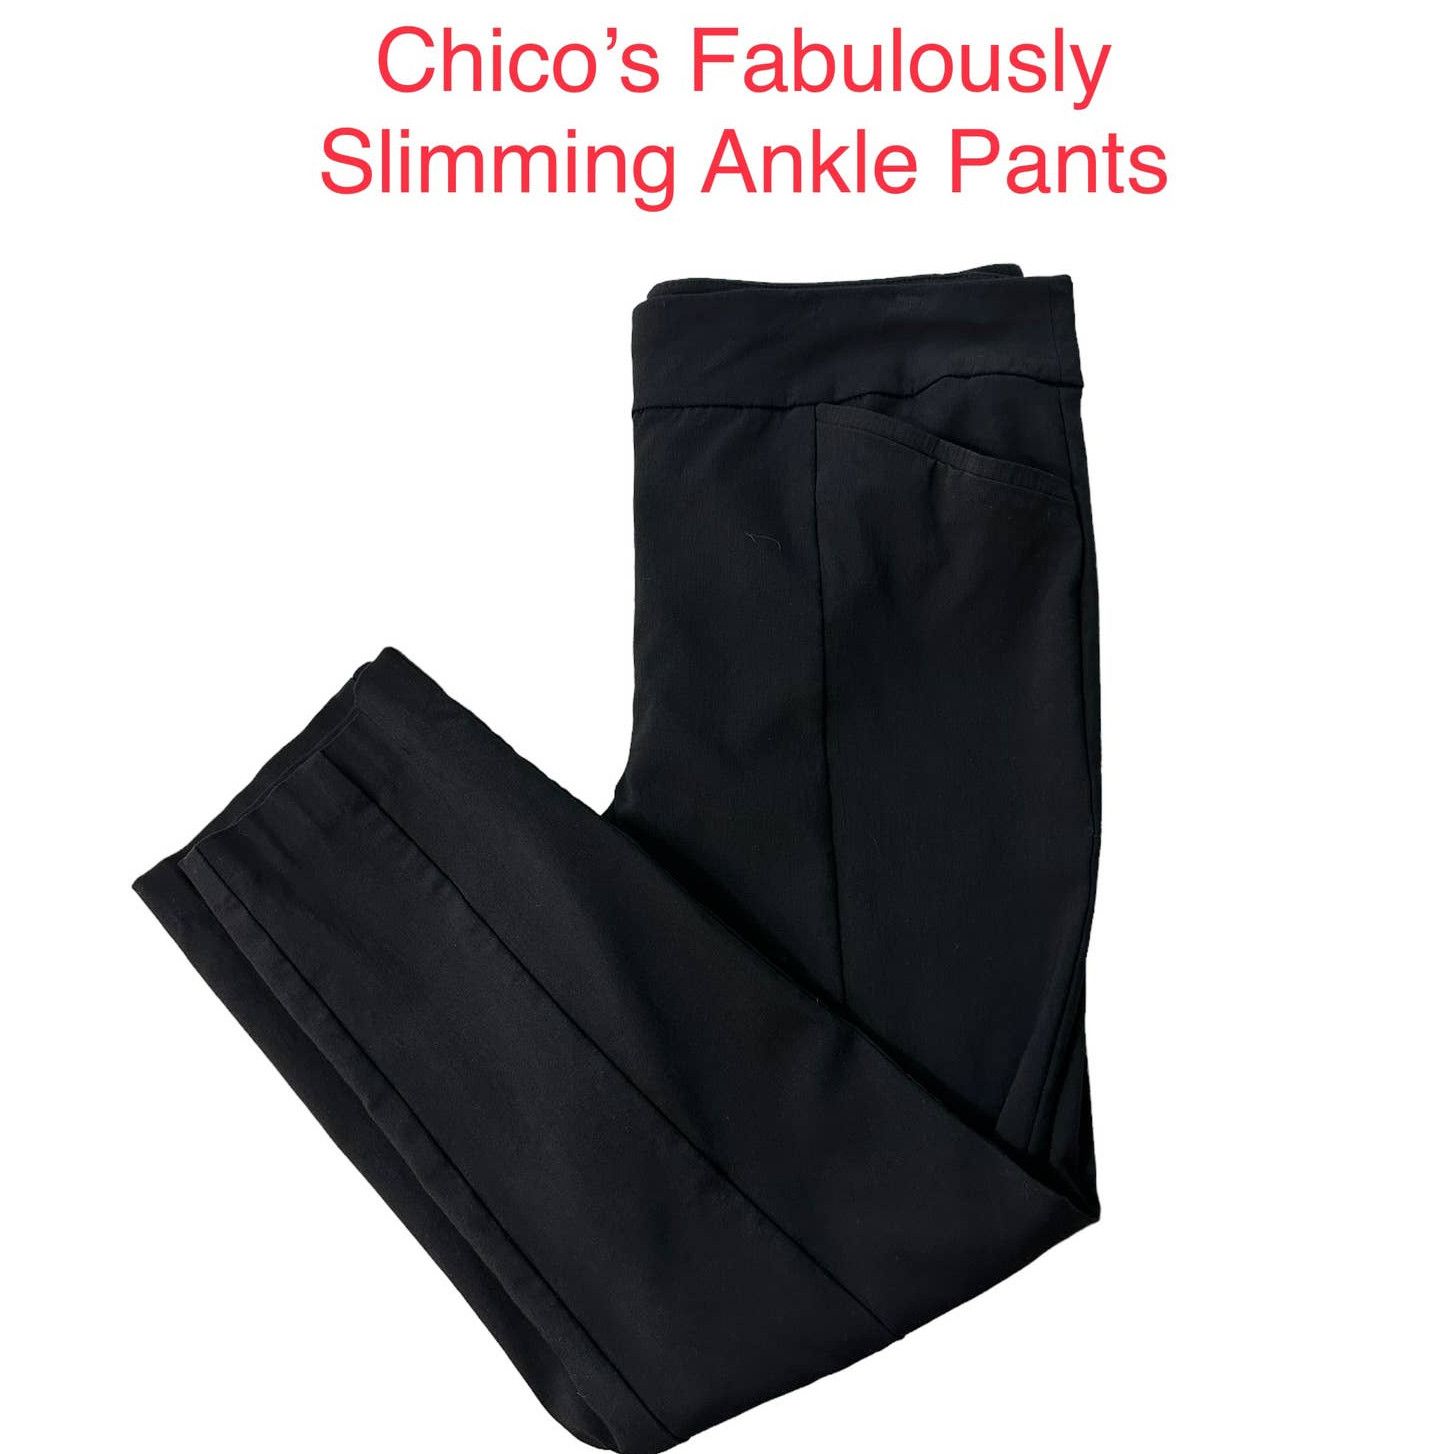 Chicos Chico's Fabulously Slimming Ankle Pants SZ 2/L/12 Black